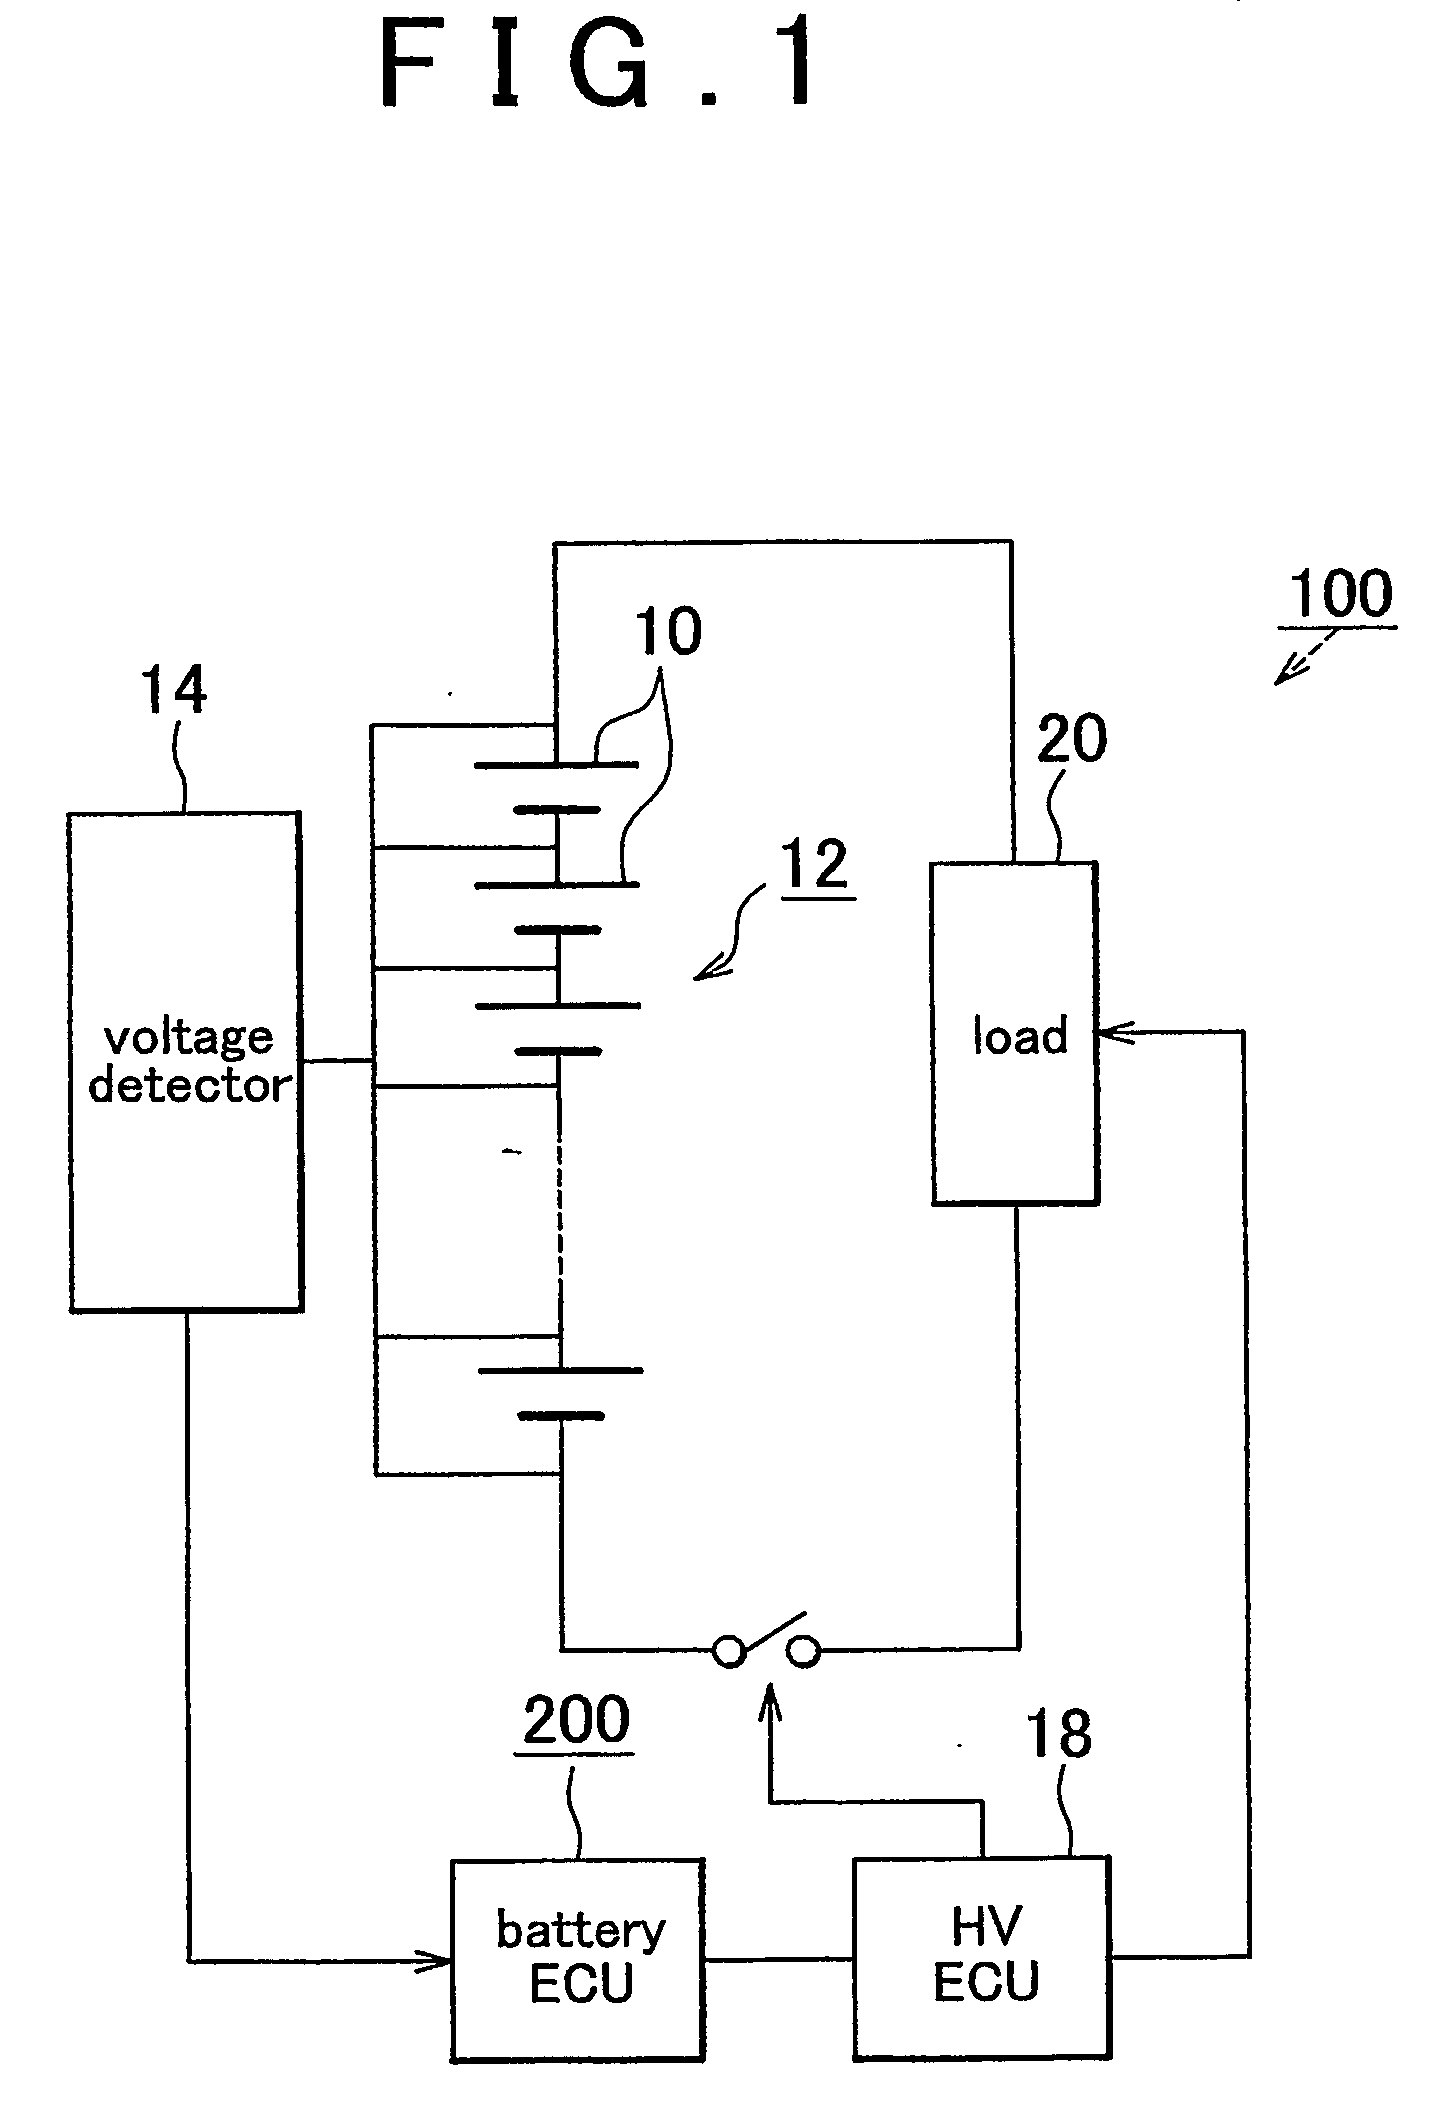 Battery pack capacity control system